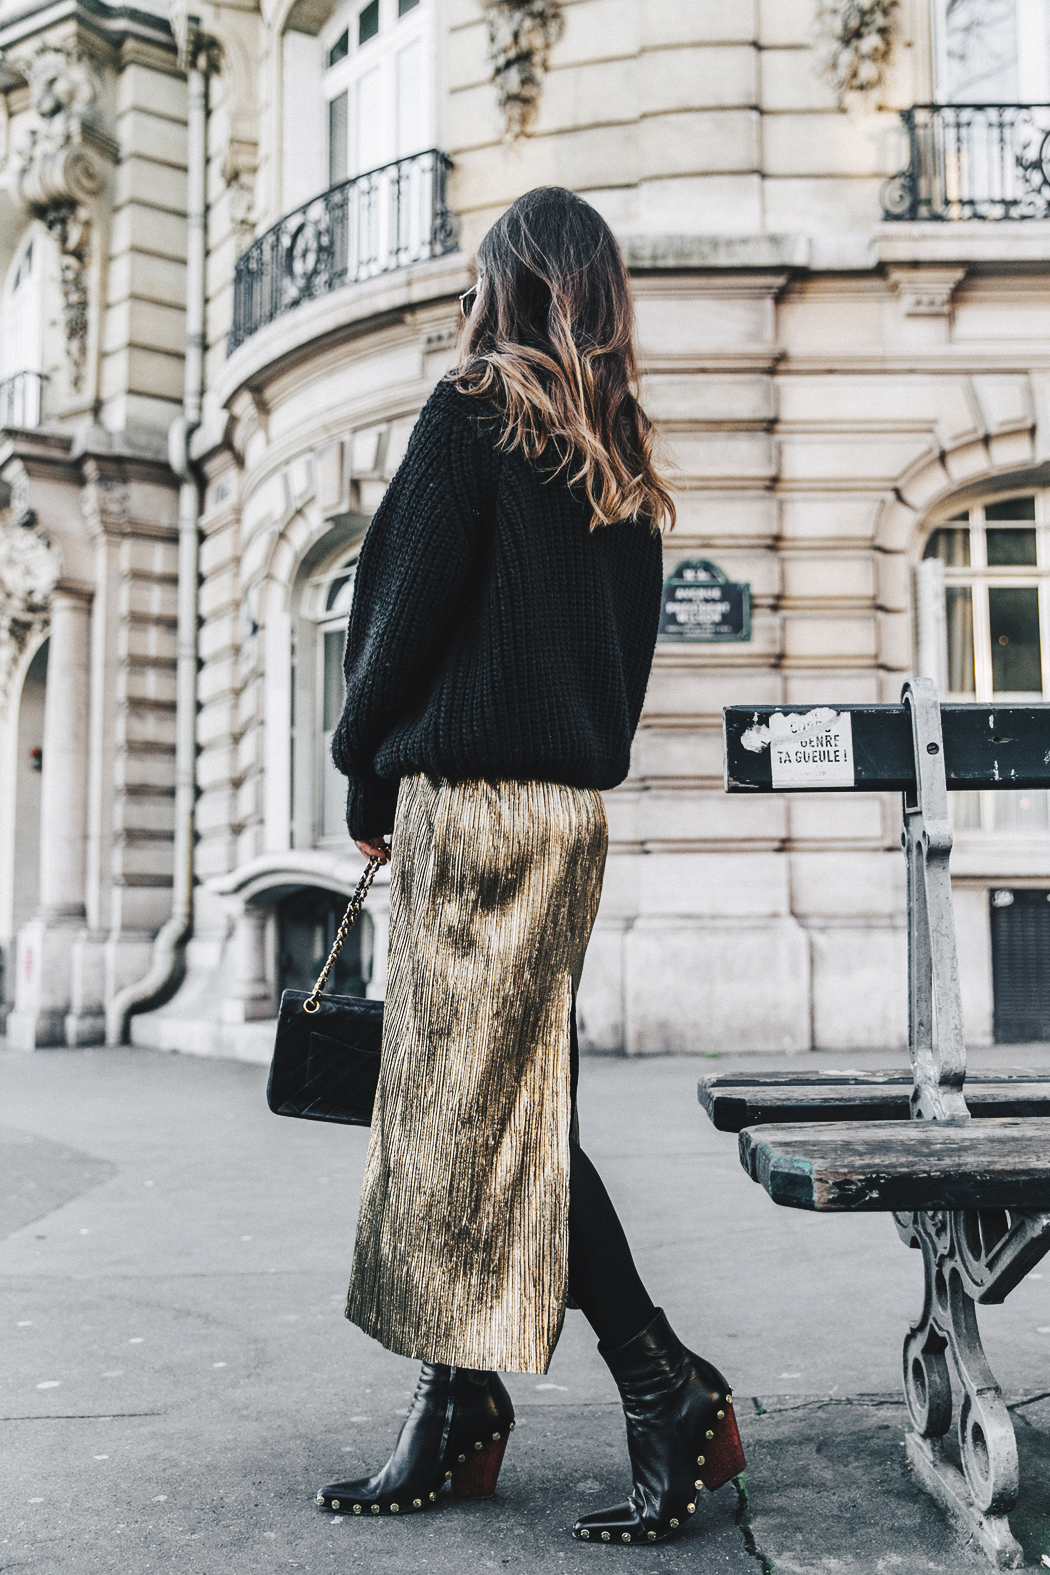 Metallic_Dress-Gold_Skirt-Pleated-Celine_Boots-Outfit-Paris-PFW-Street_Style-29